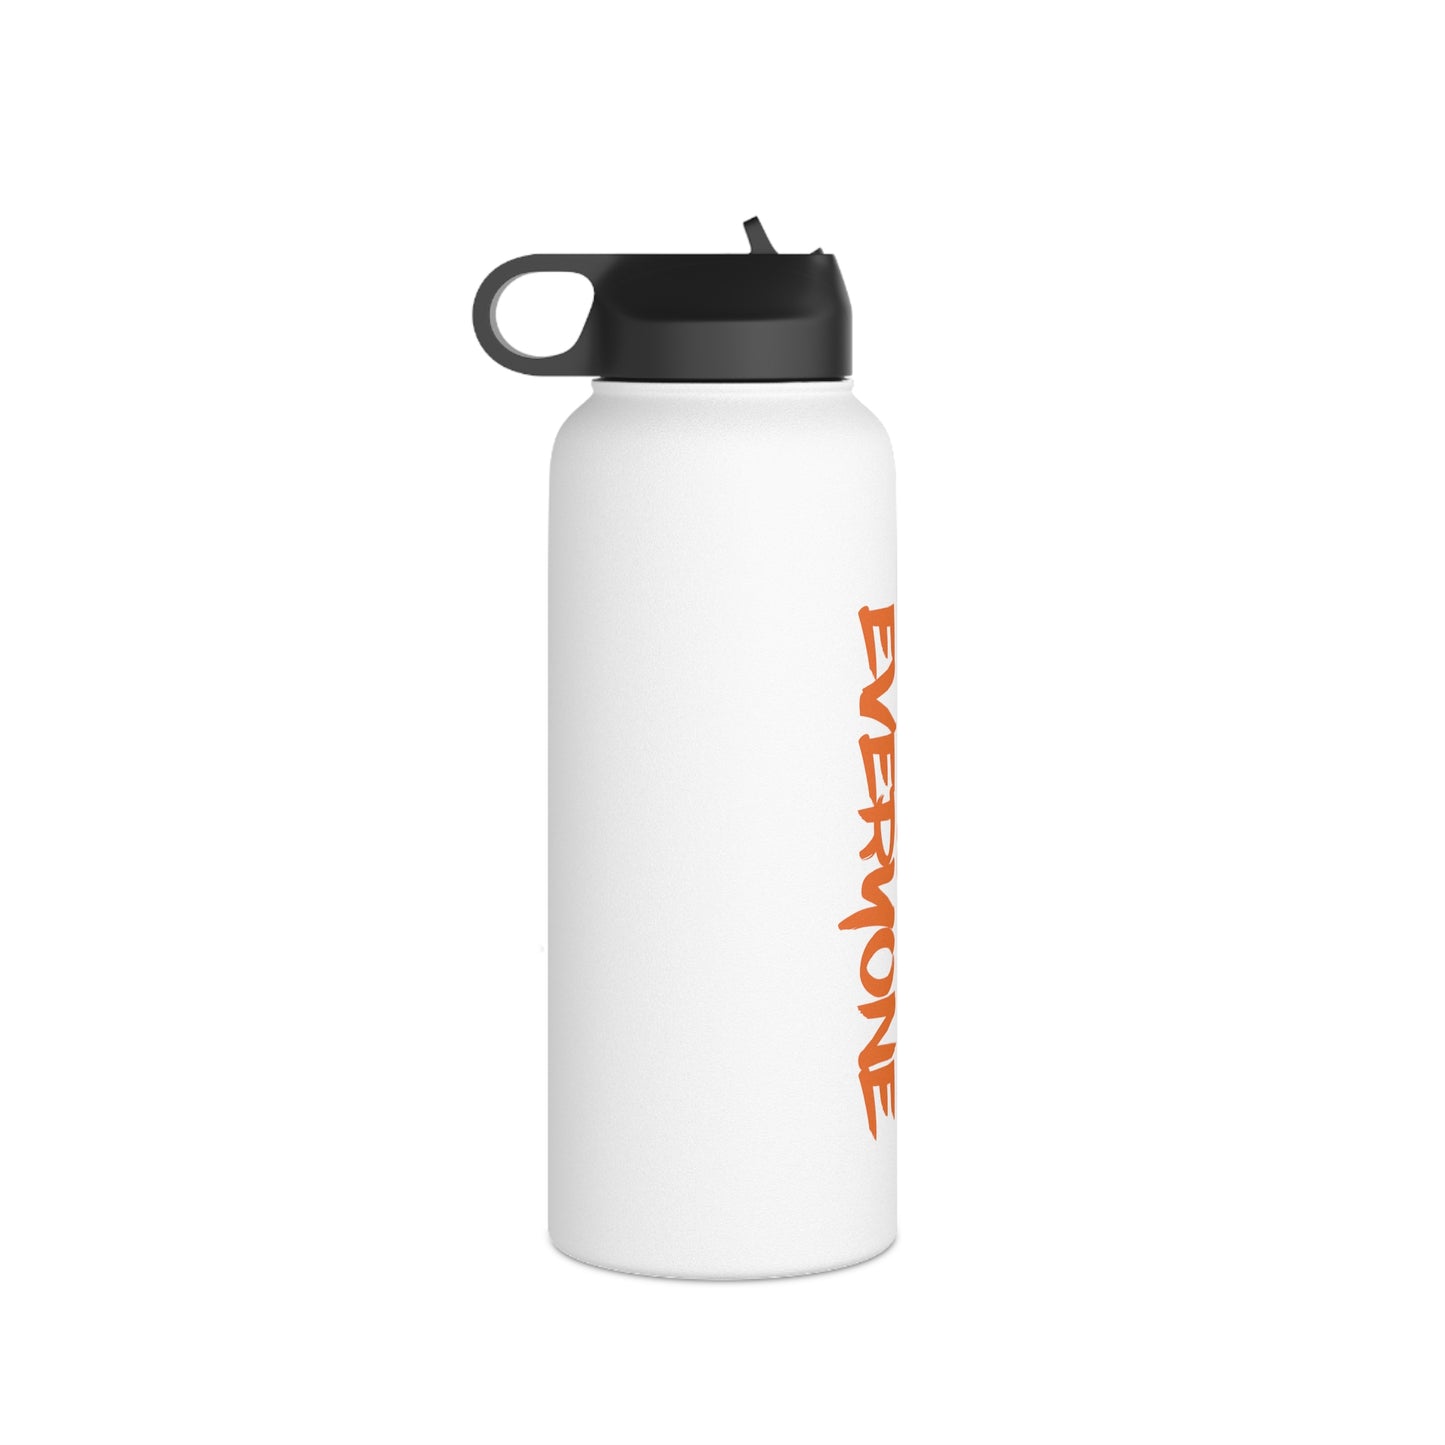 H-Town vs Everyone Stainless Steel Water Bottle